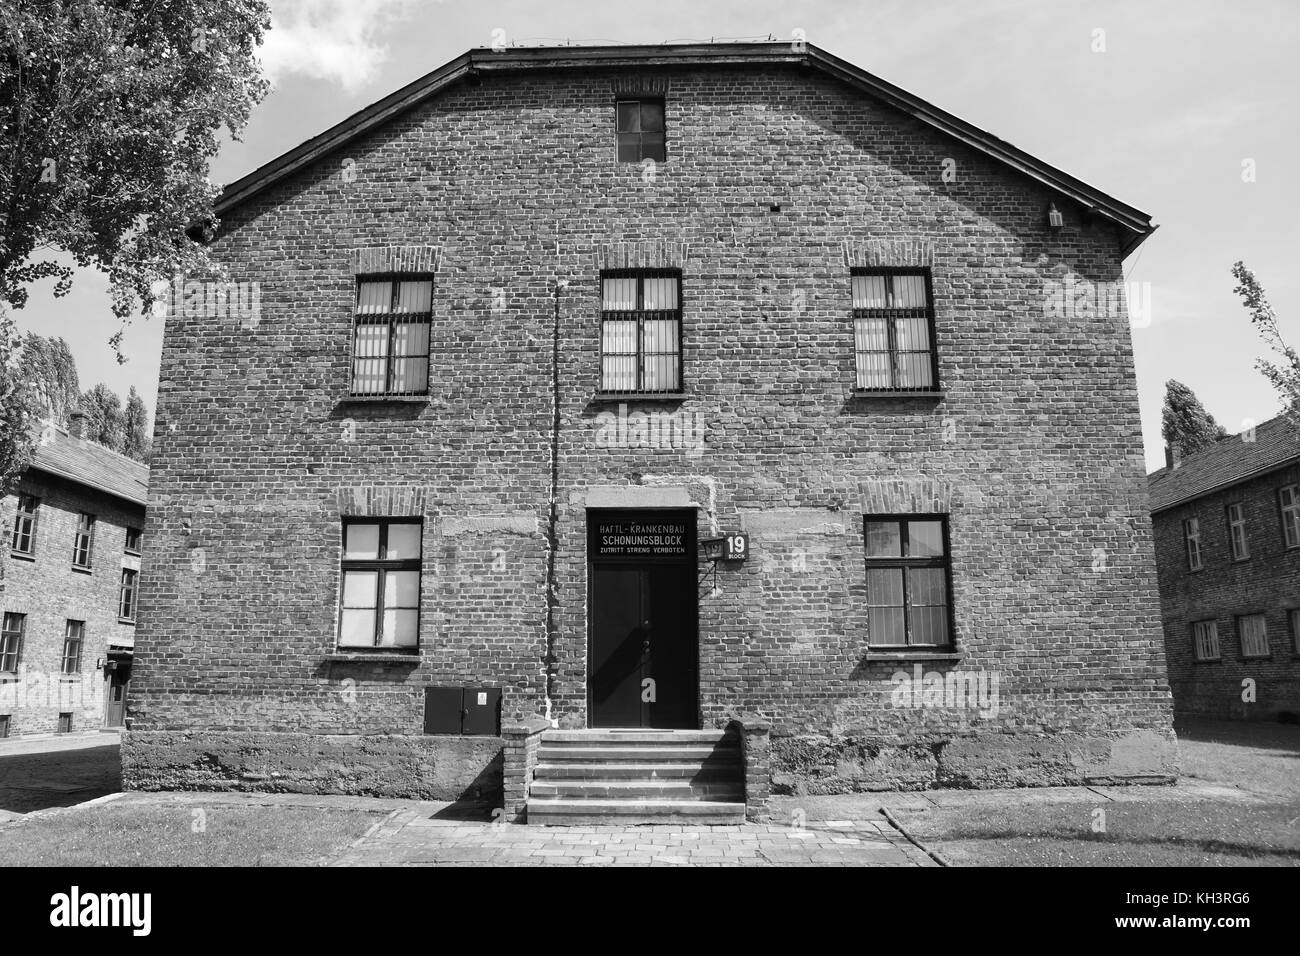 Hospital barrack at Auschwitz concentration camp, Poland Stock Photo